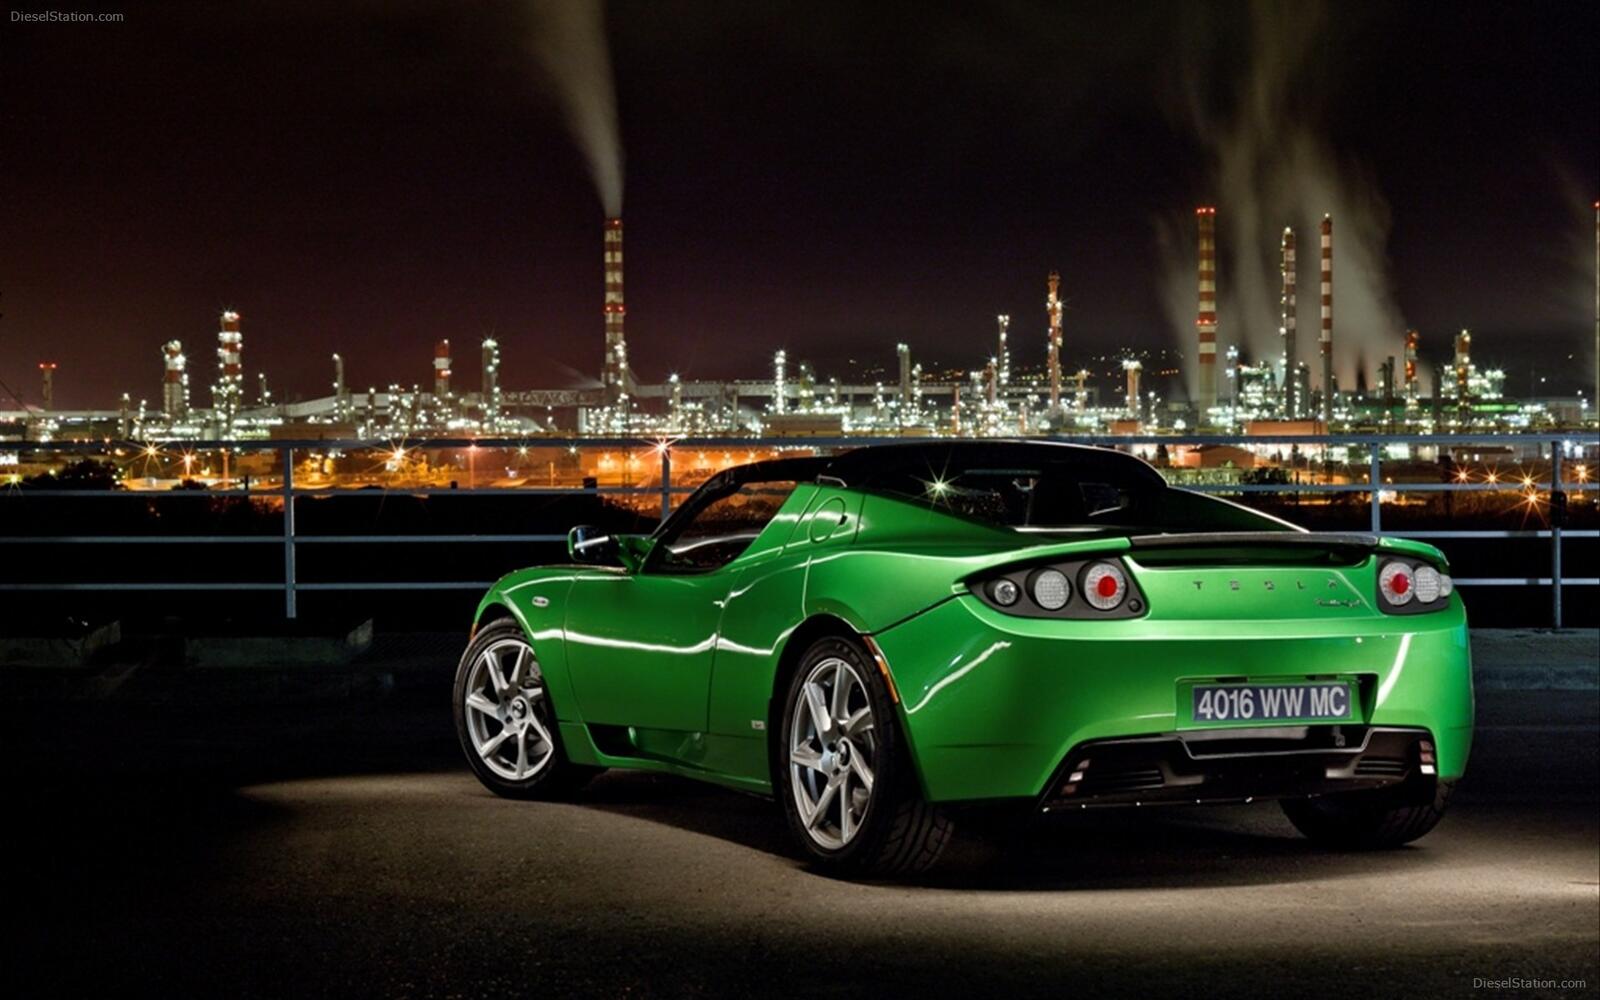 Free photo A green Lotus Evora against the backdrop of the city at night